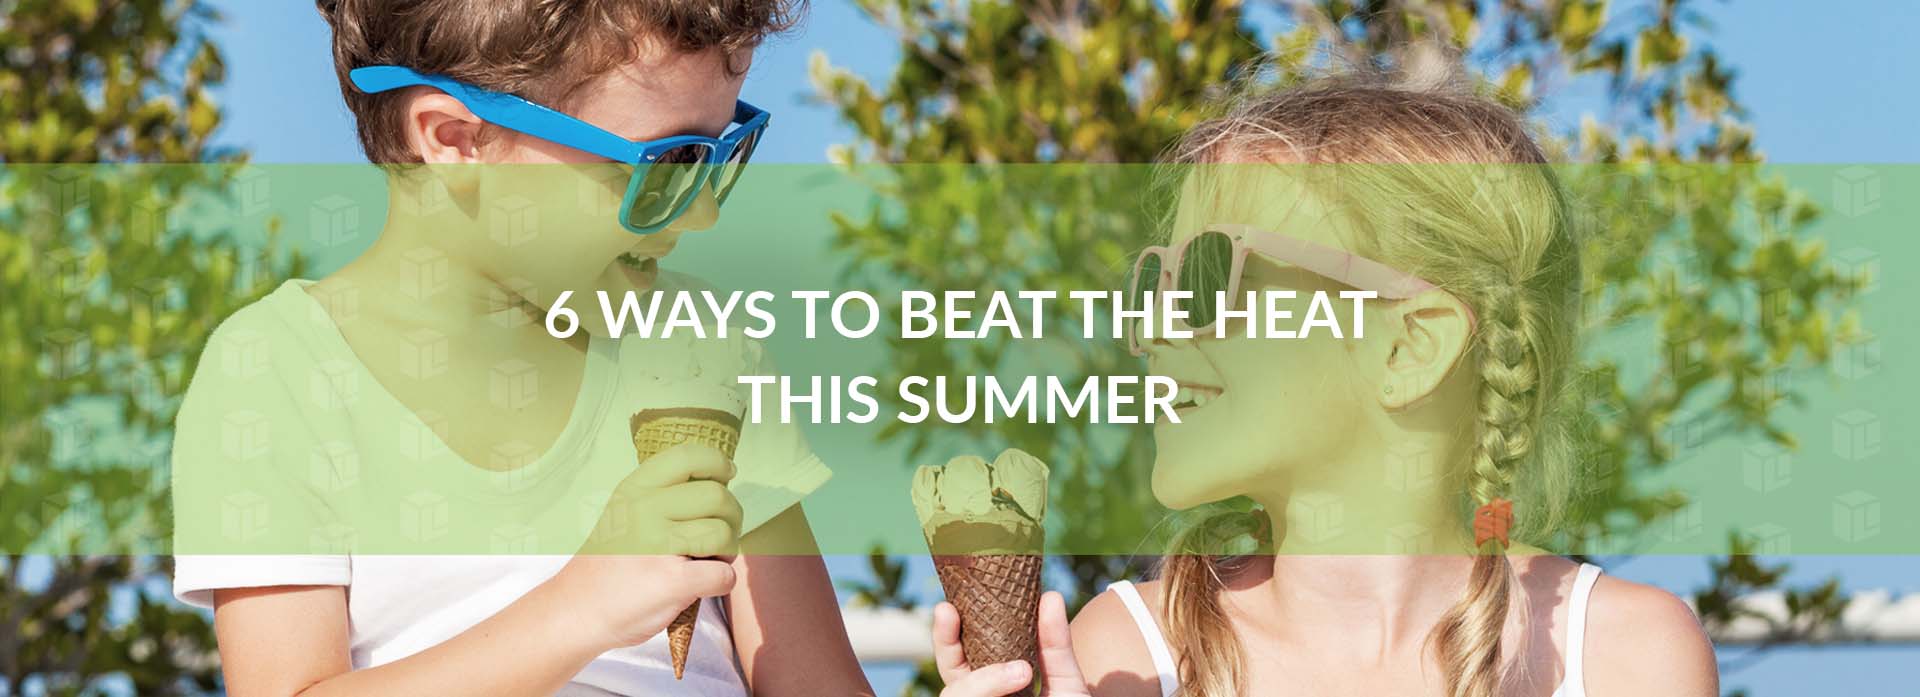 6 Ways To Beat The Heat This Summer